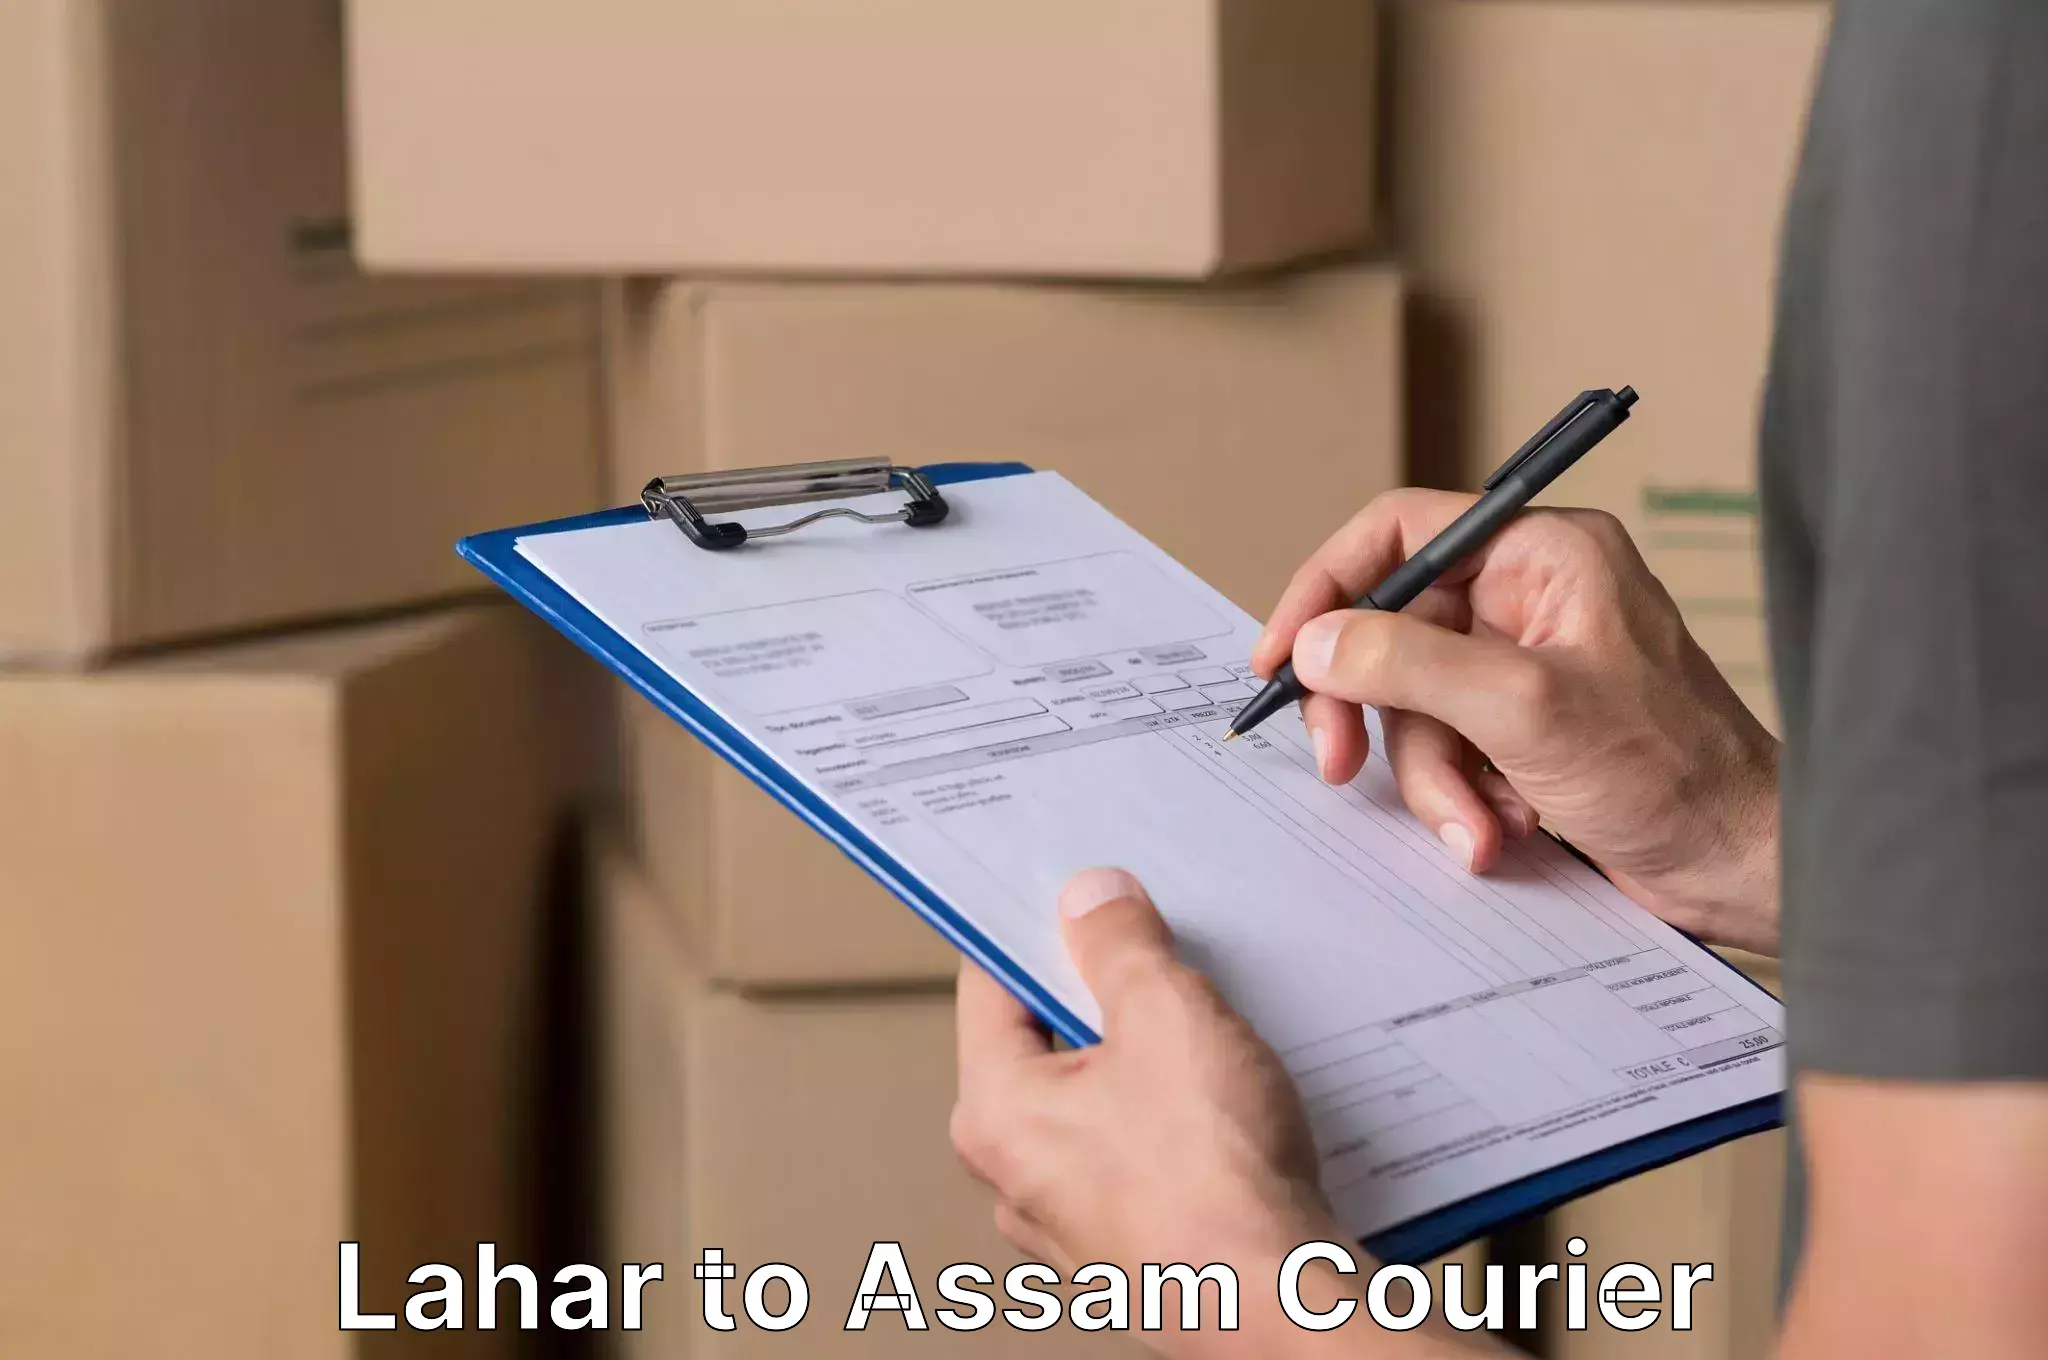 Furniture moving specialists Lahar to Hajo